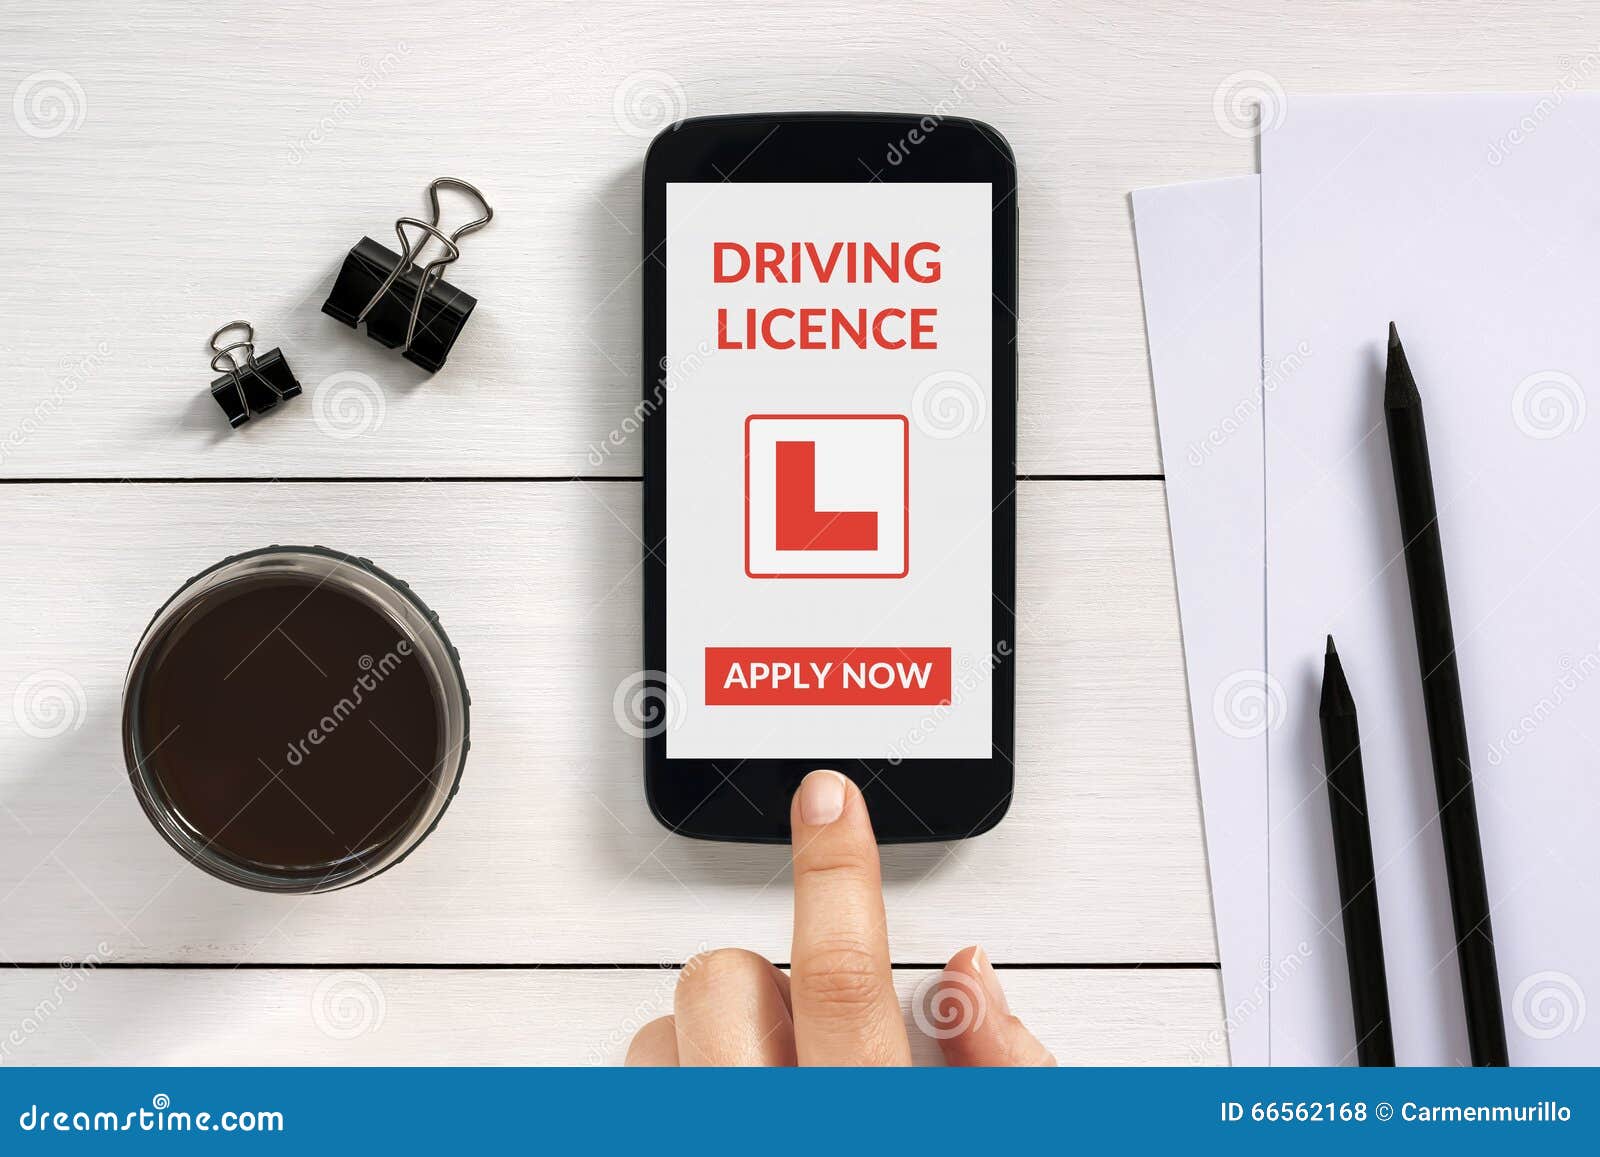 Download Driving Licence App Mock Up On Smart Phone Screen With ...